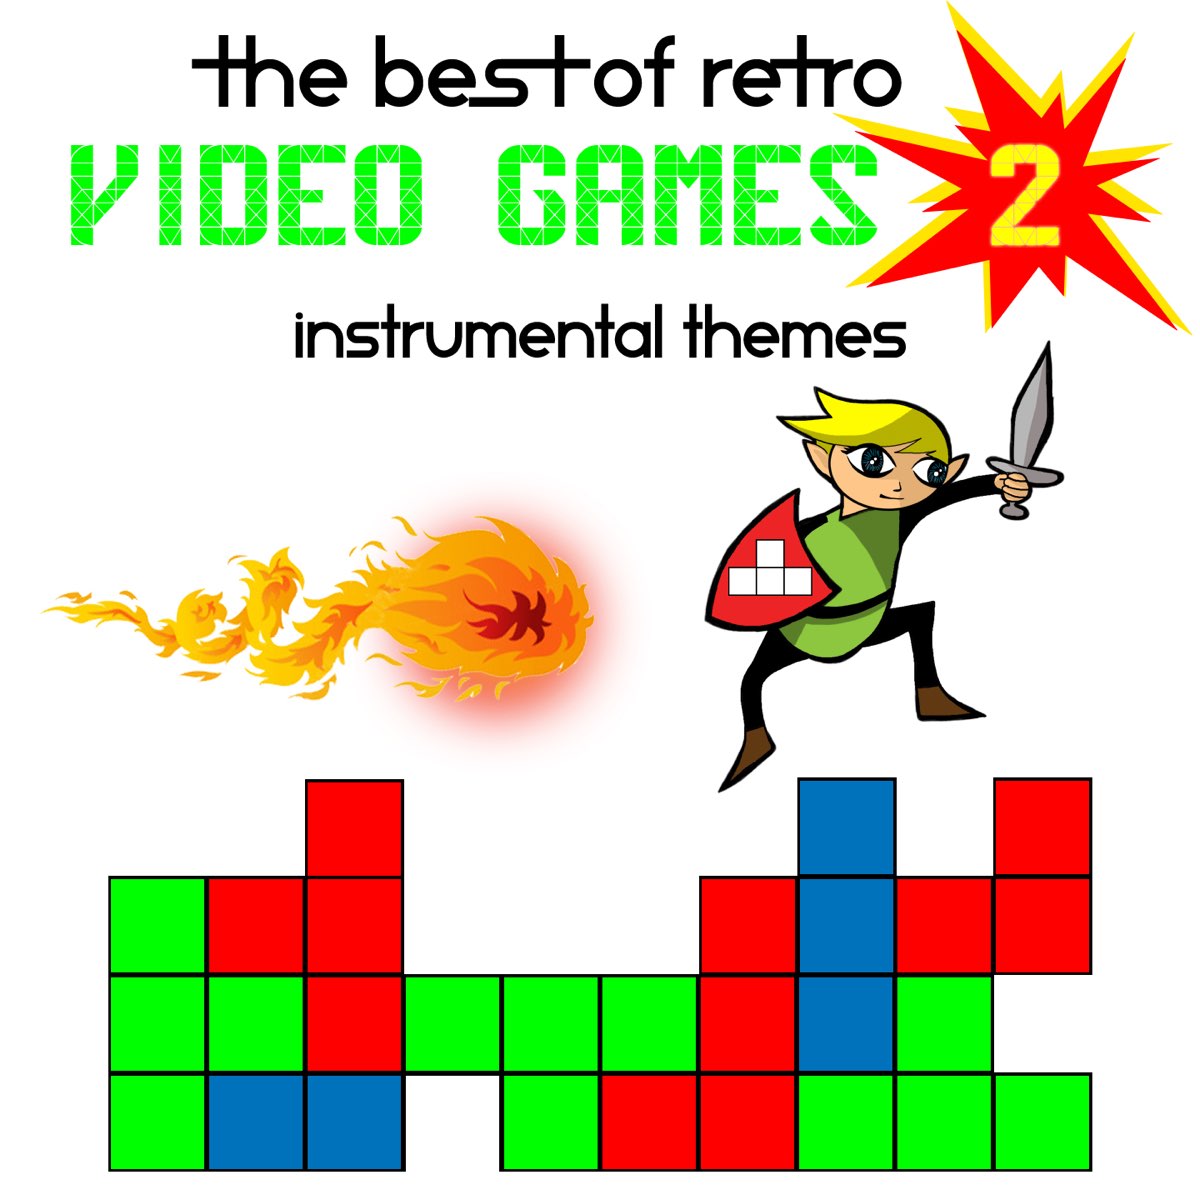 The Best Of Retro Video Games - Instrumental Themes by The Video Game Music  Orchestra on Apple Music